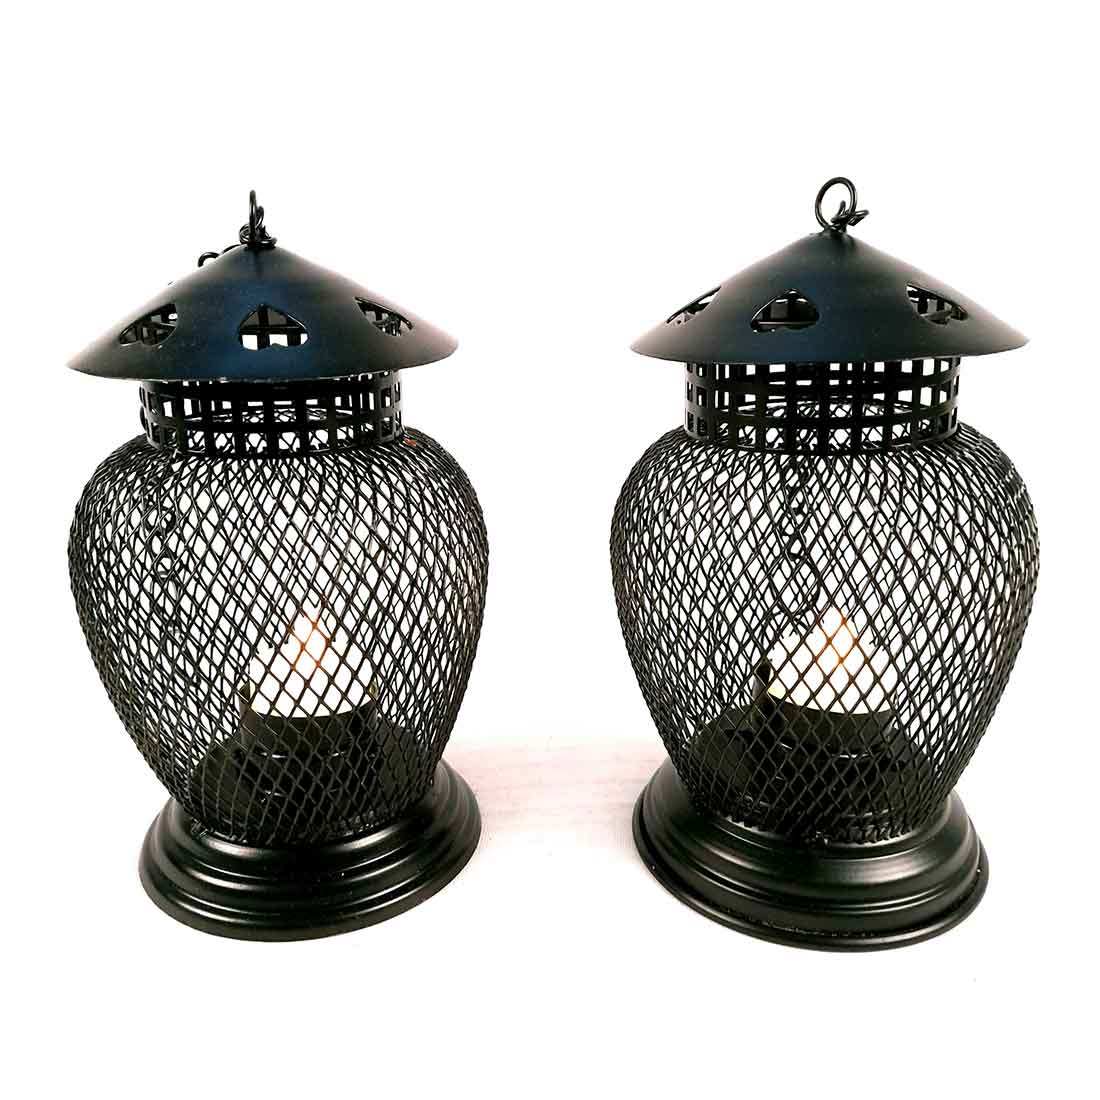 TeaLight Holder Hanging | Candle Holders Stand Wall Mount | Tea Light Candle Stands - Metal - For Home, Table, Living Room, Dining room, Bedroom Decor | For Festival Decoration & Gifts -Set of 2